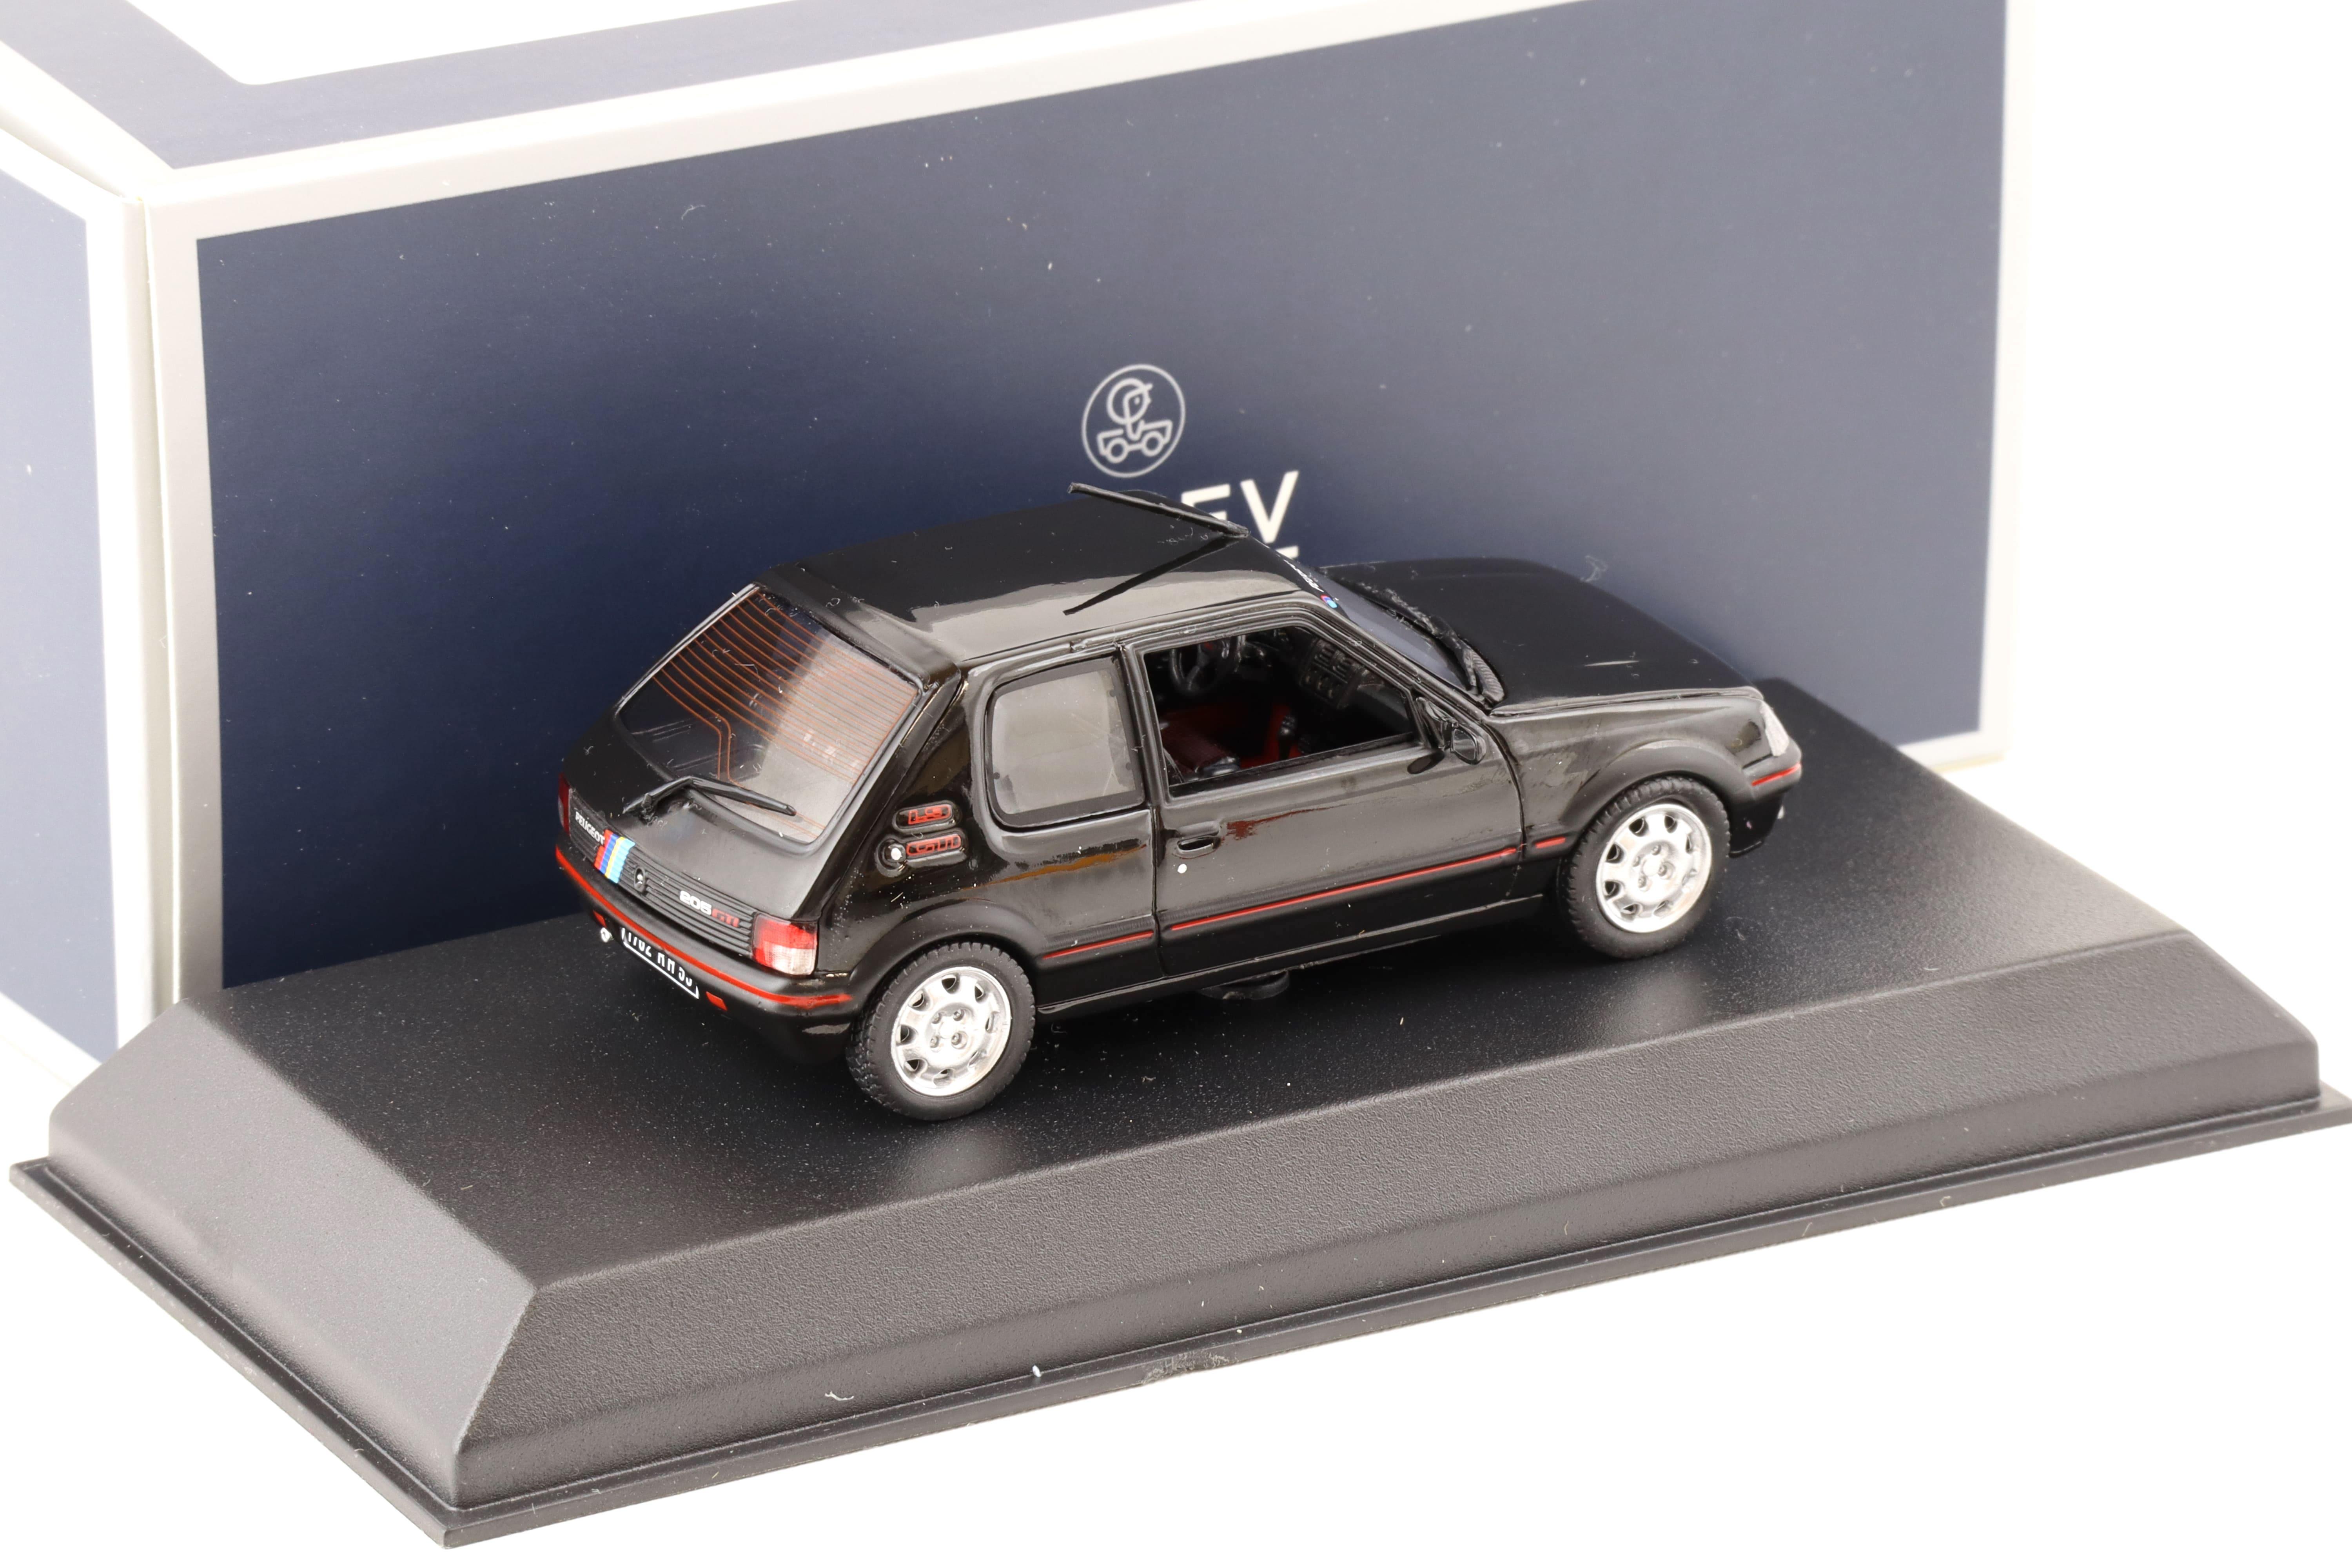 1:43 Norev 1992 Peugeot 205 GTi 1.9 black with PTS deco